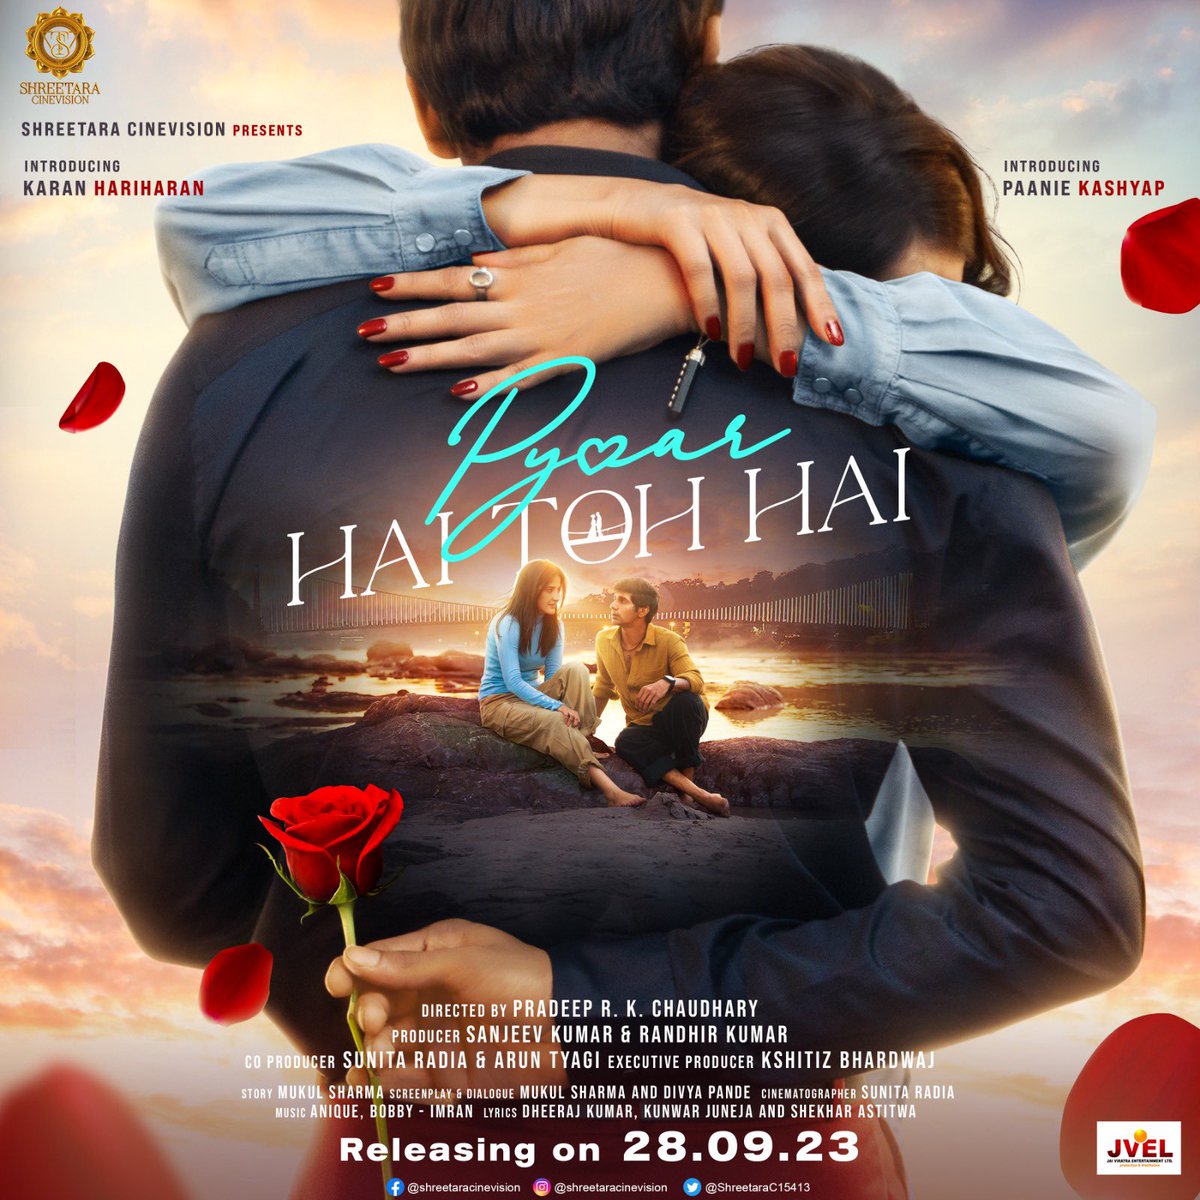 SINGER HARIHARAN’S SON KARAN MAKES HIS ACTING DEBUT… #TeaserPoster of #PyaarHaiTohHai - which introduces #KaranHariharan [son of singer #Hariharan] and #PaanieKashyap - unveils… In *cinemas* 28 Sept 2023.

The film is produced by Sanjeev Kumar and Randhir Kumar and directed by